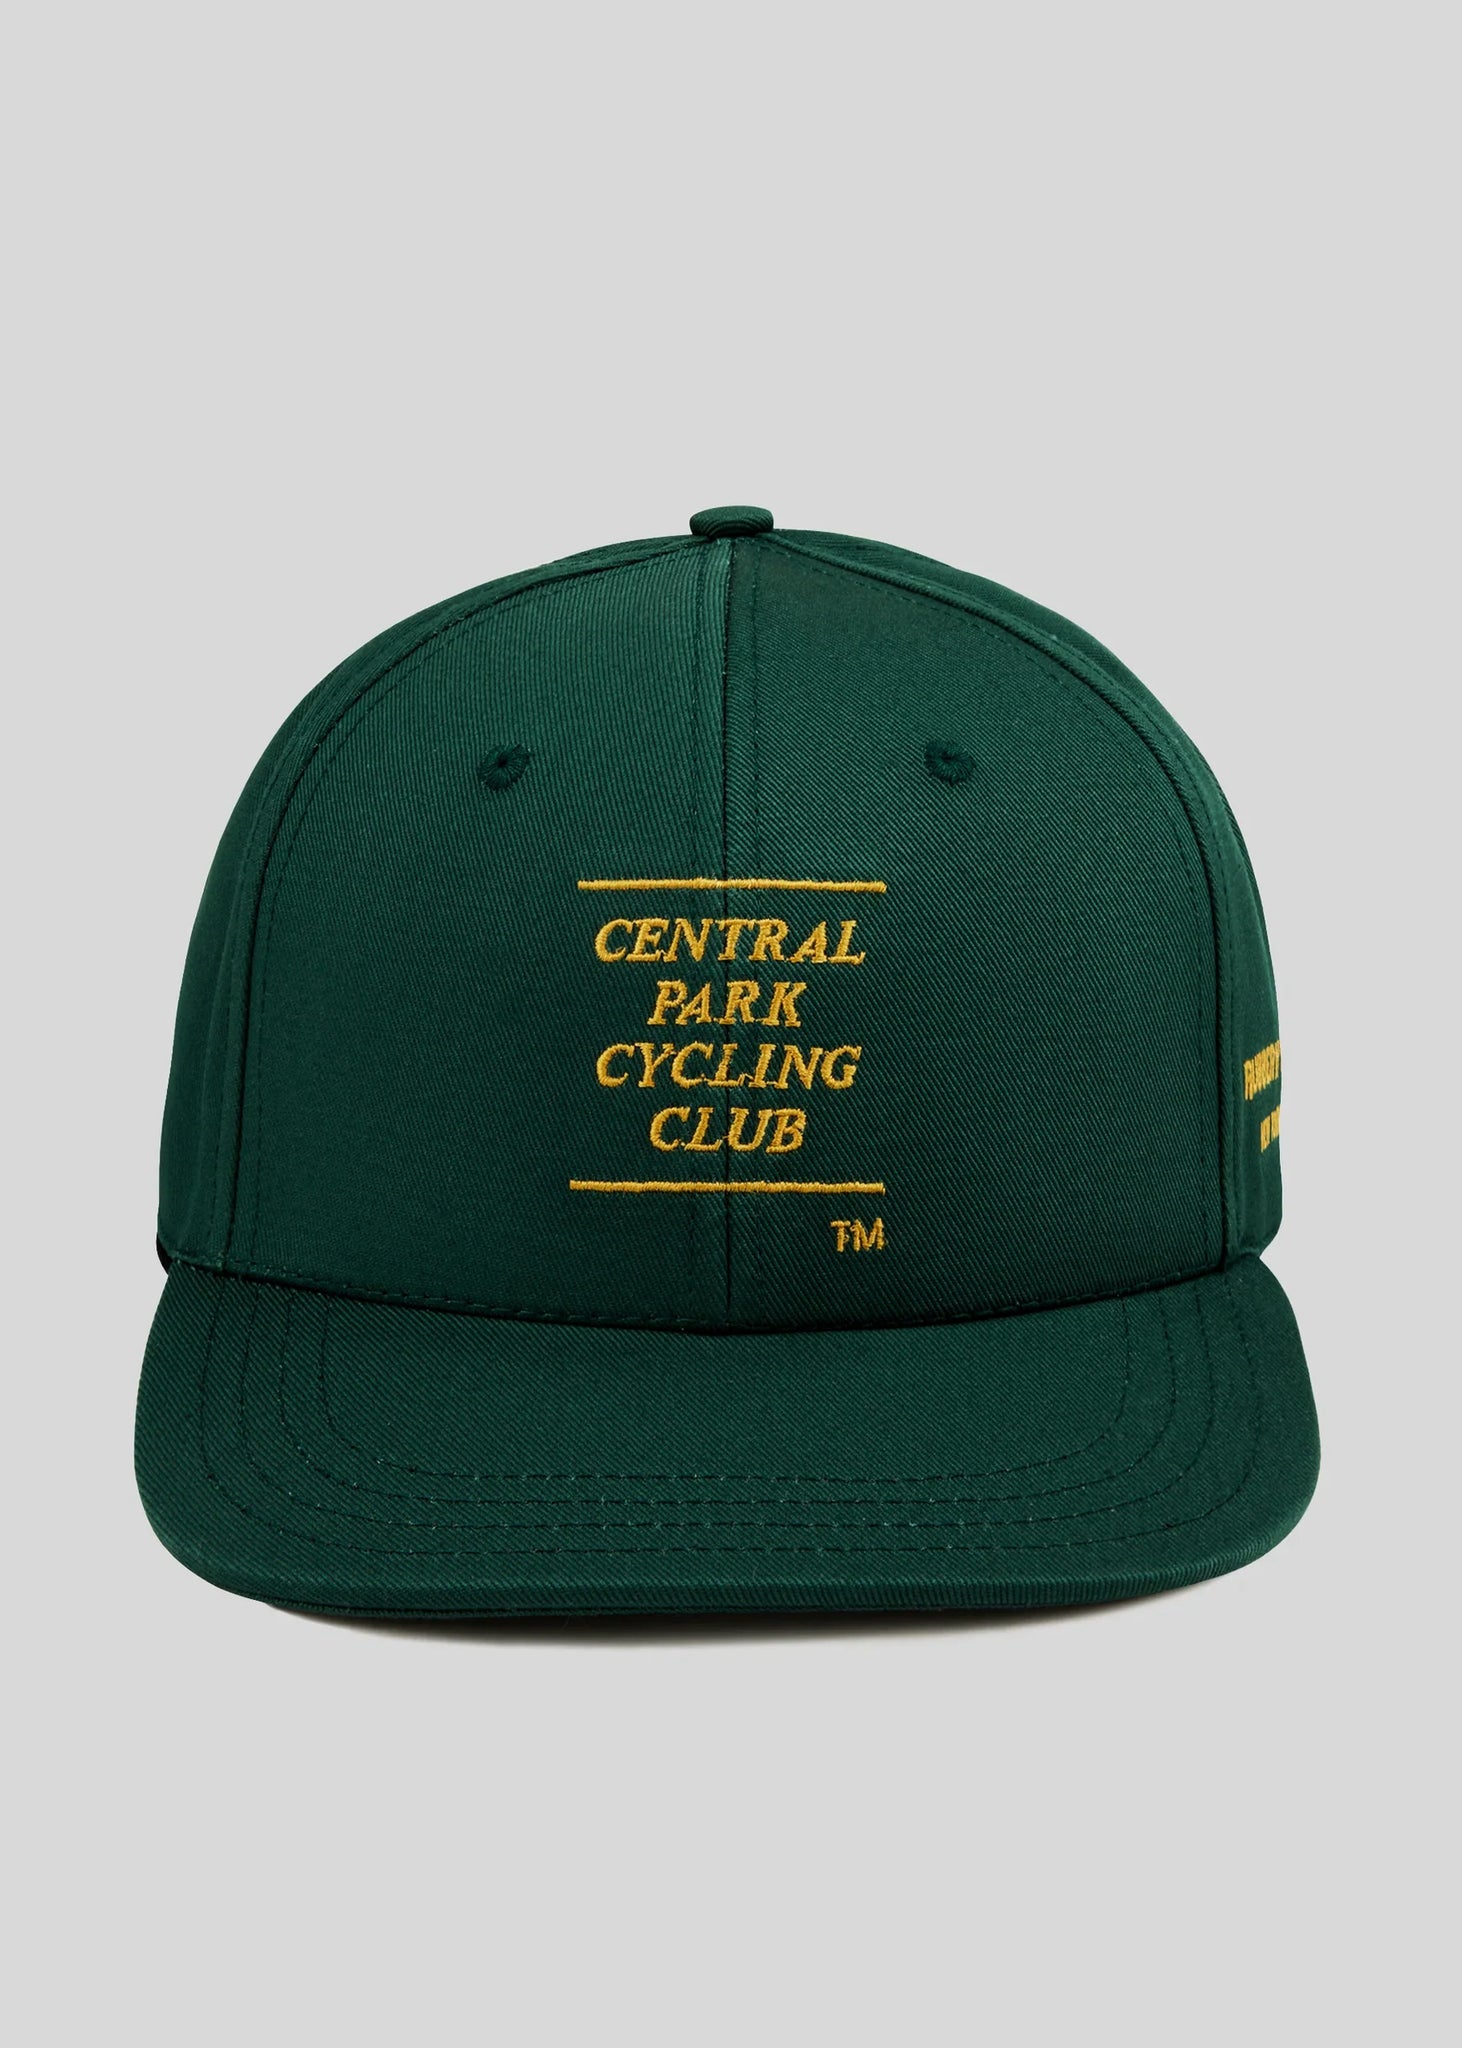 Rubber N' Road | Central Park Cycling Club Cap